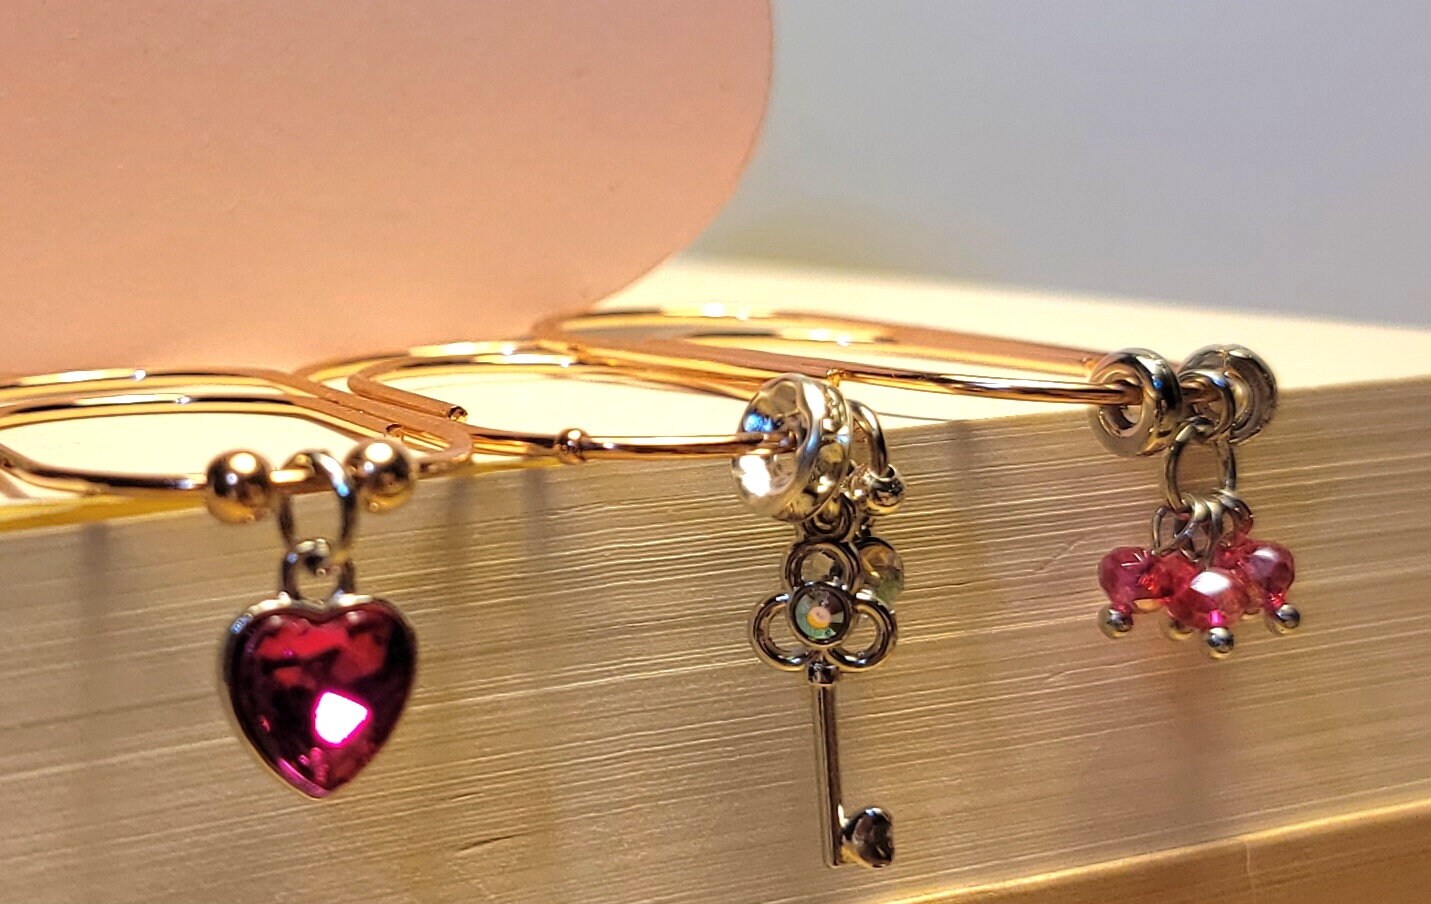 Set of "Love to Love" luxury paperclip charms and bookmarks for planners, agendas, books & binders - Thrice Exceptional